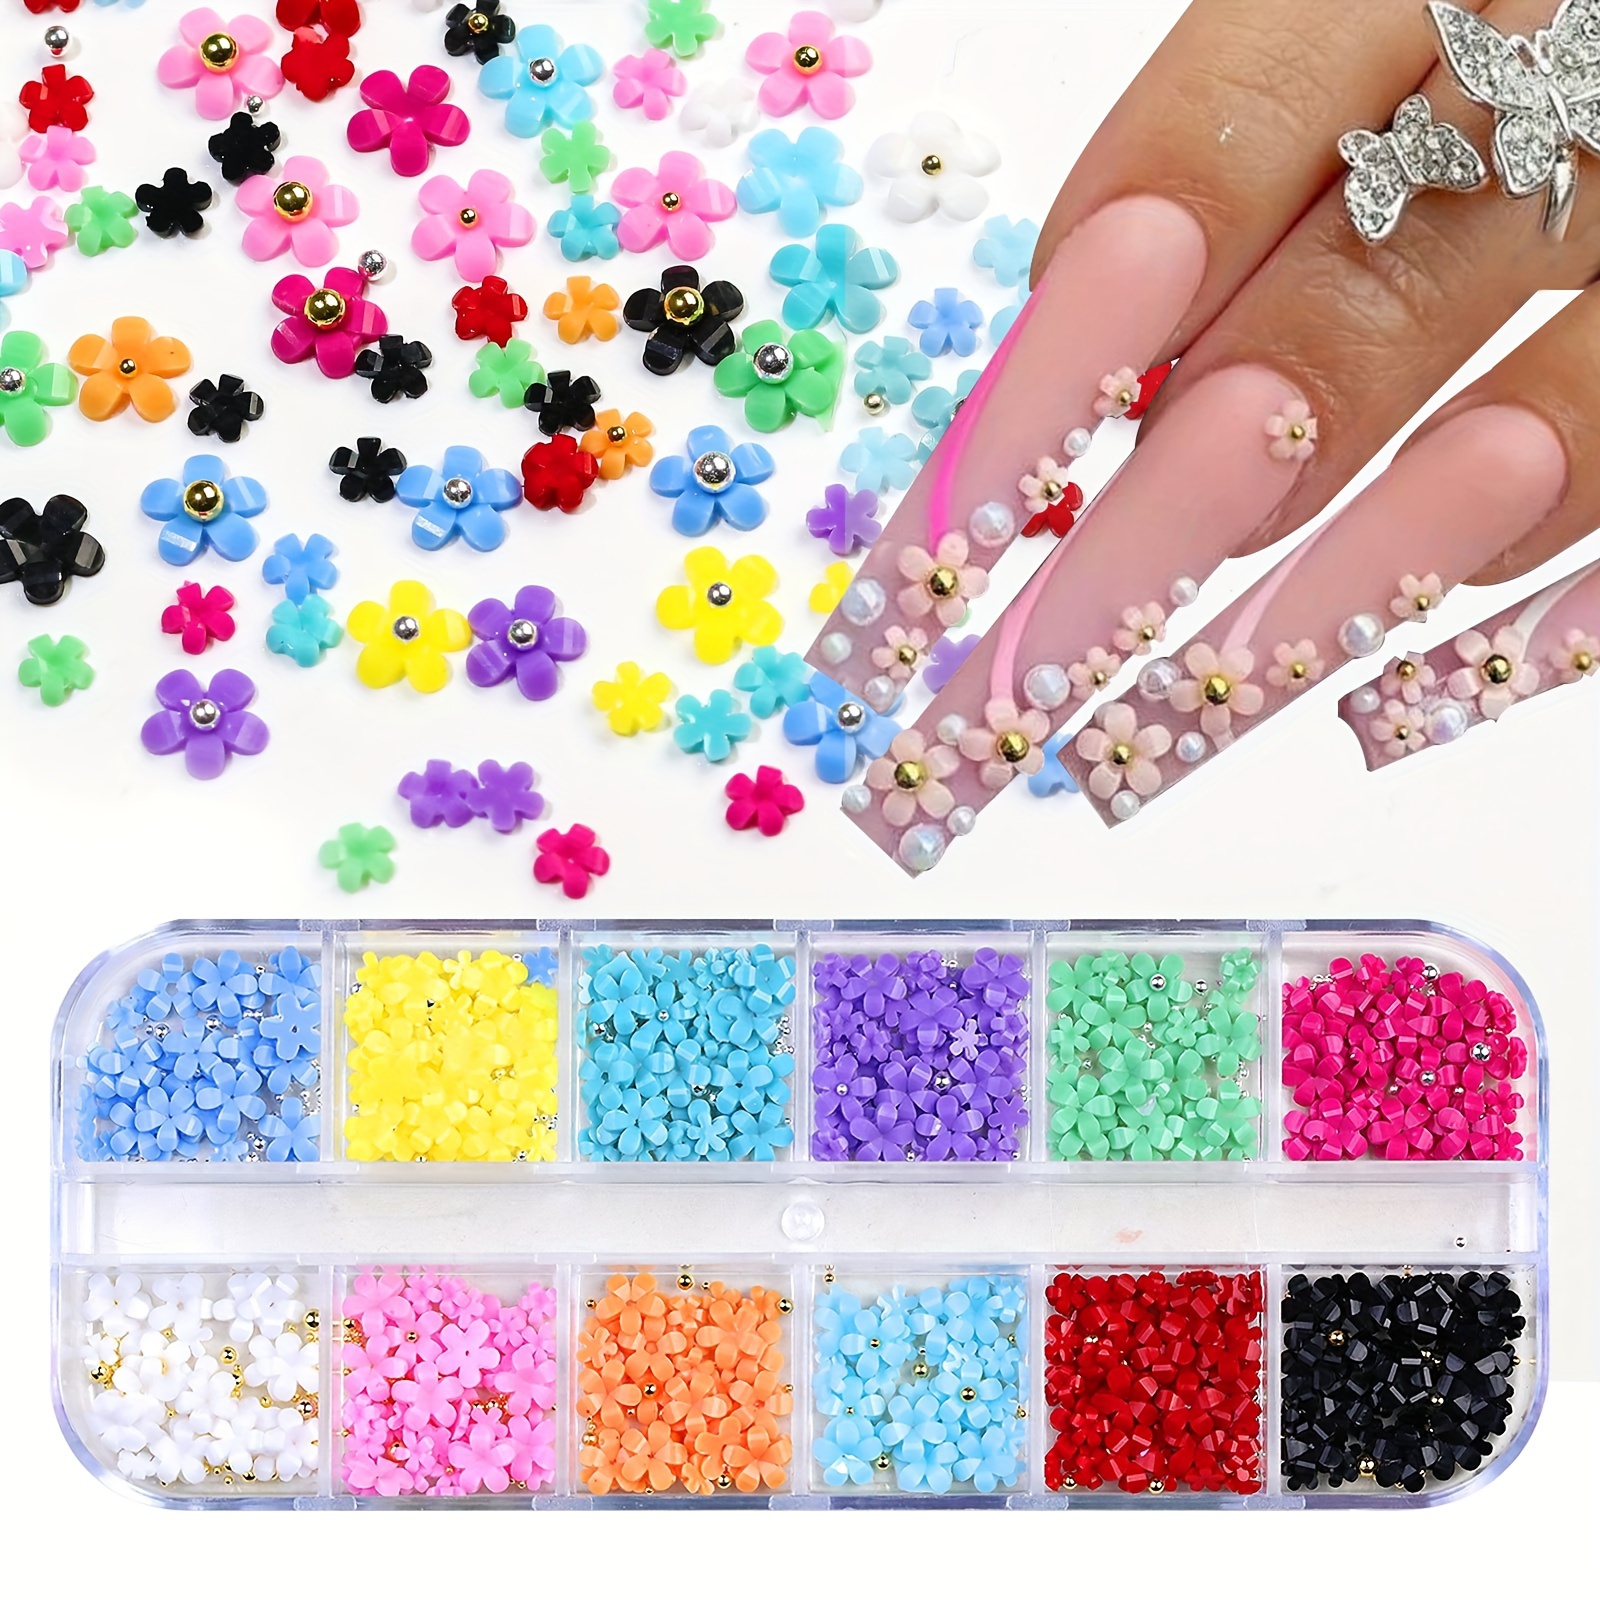 

12 Grids 3d Acrylic Flower Nail Art Charms For Nail Art Decoration Mixed Steel Beads Gems Charms Kawaii Nail Supplies For Accessories